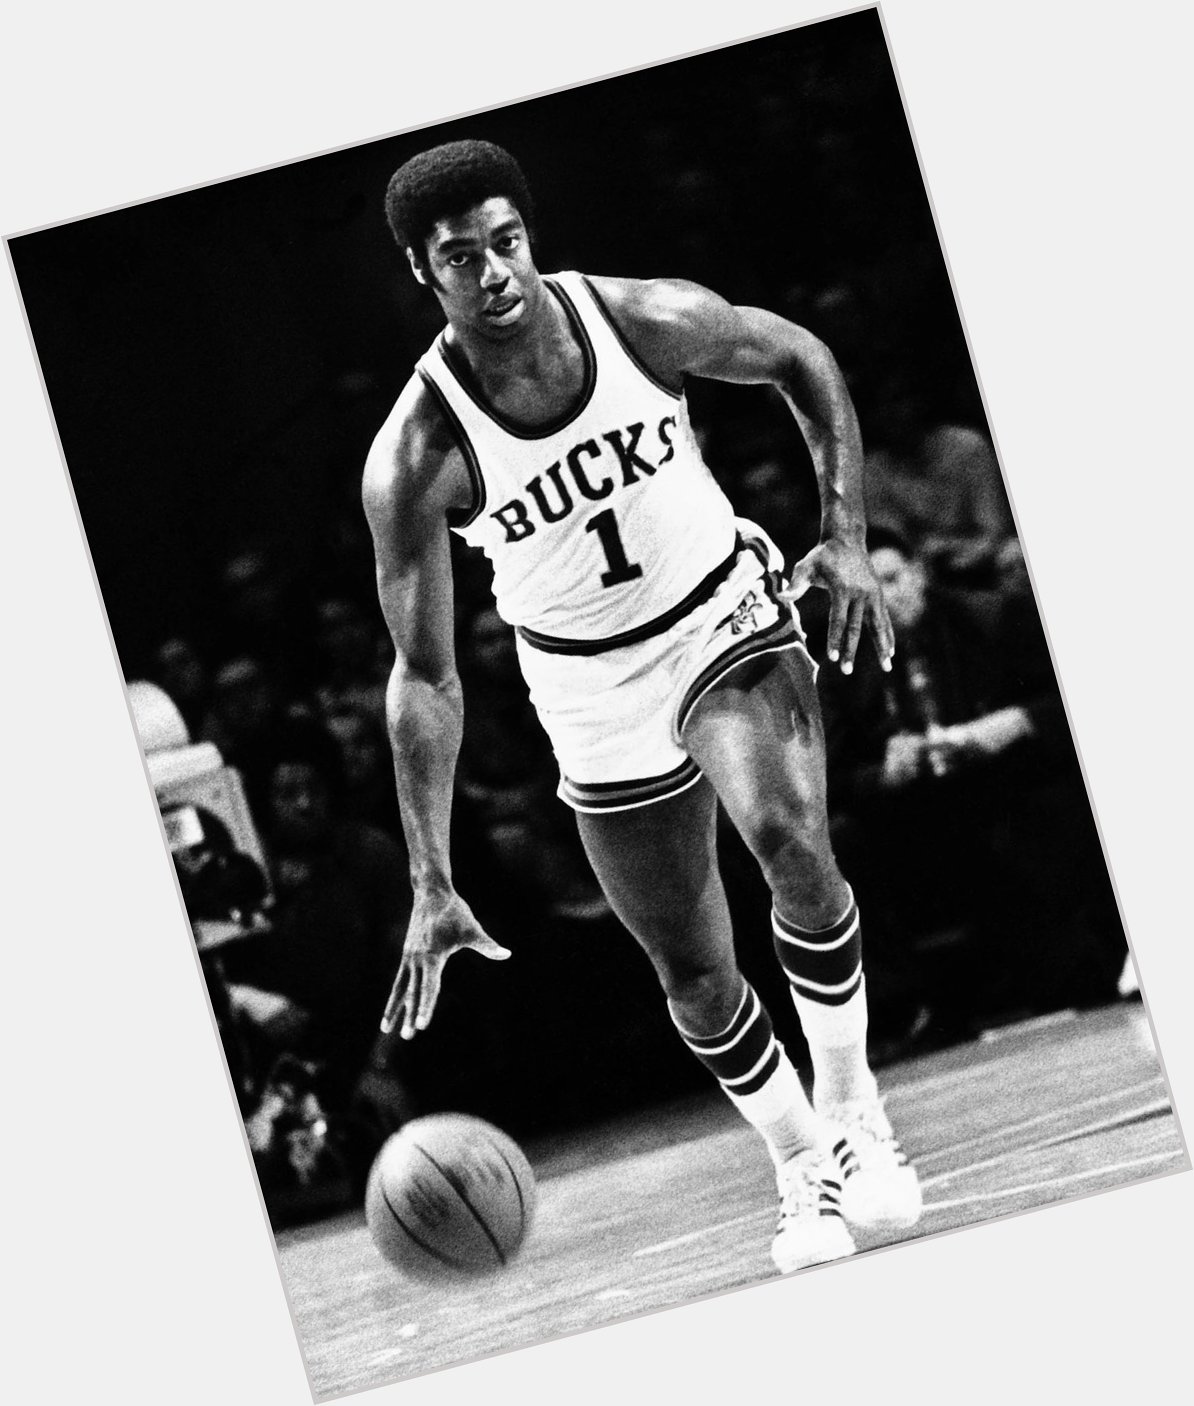 Happy birthday Oscar Robertson! Thank you for all you did for the NBA. 